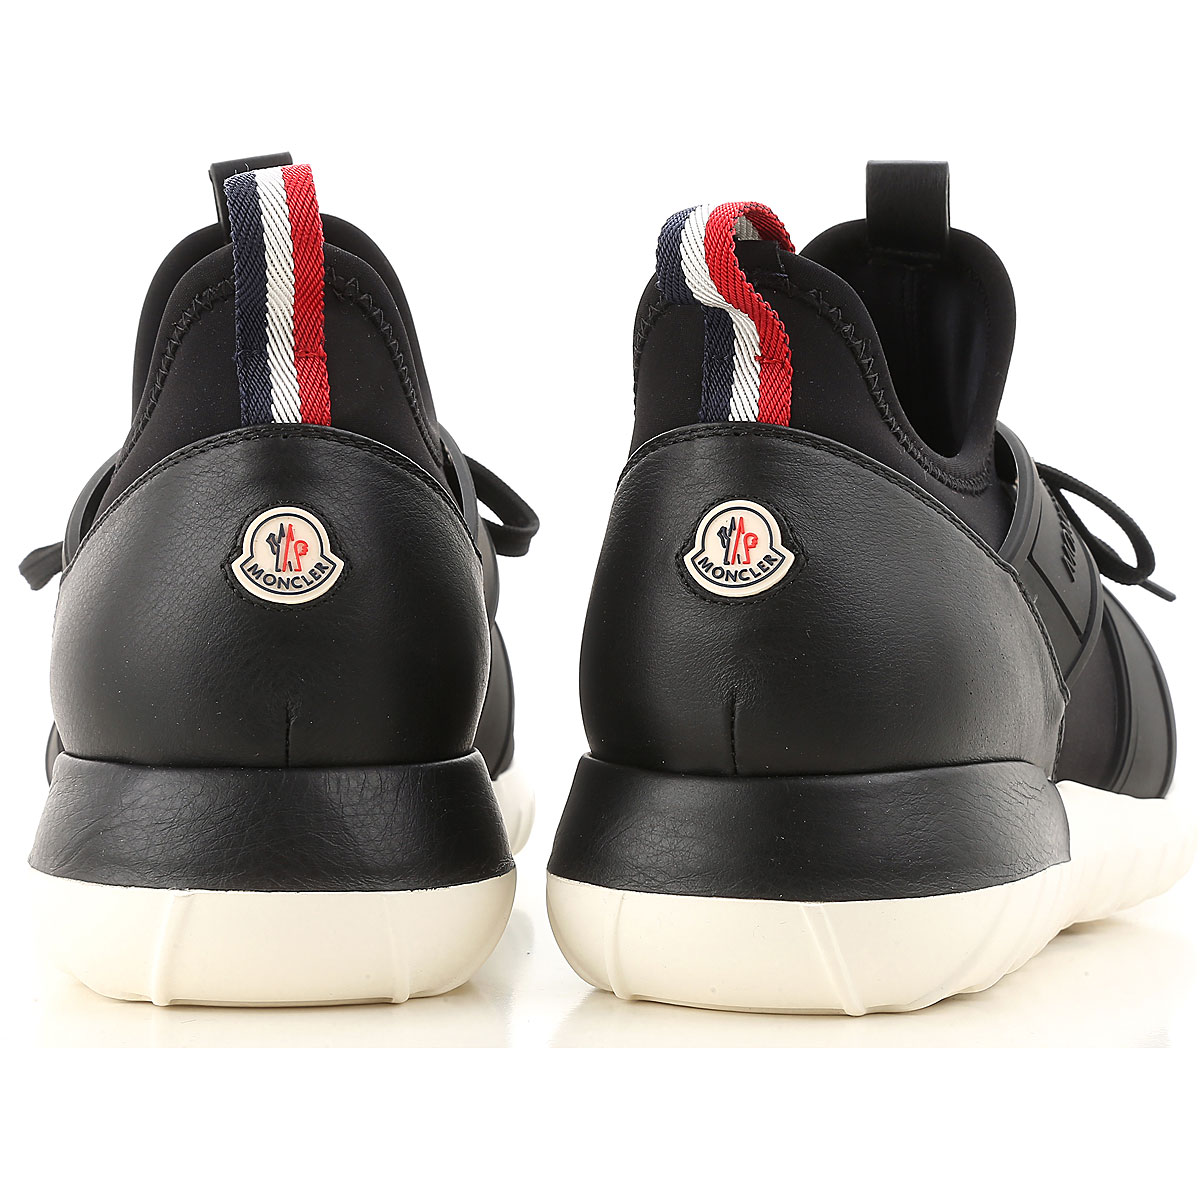 Mens Shoes Moncler, Style code 